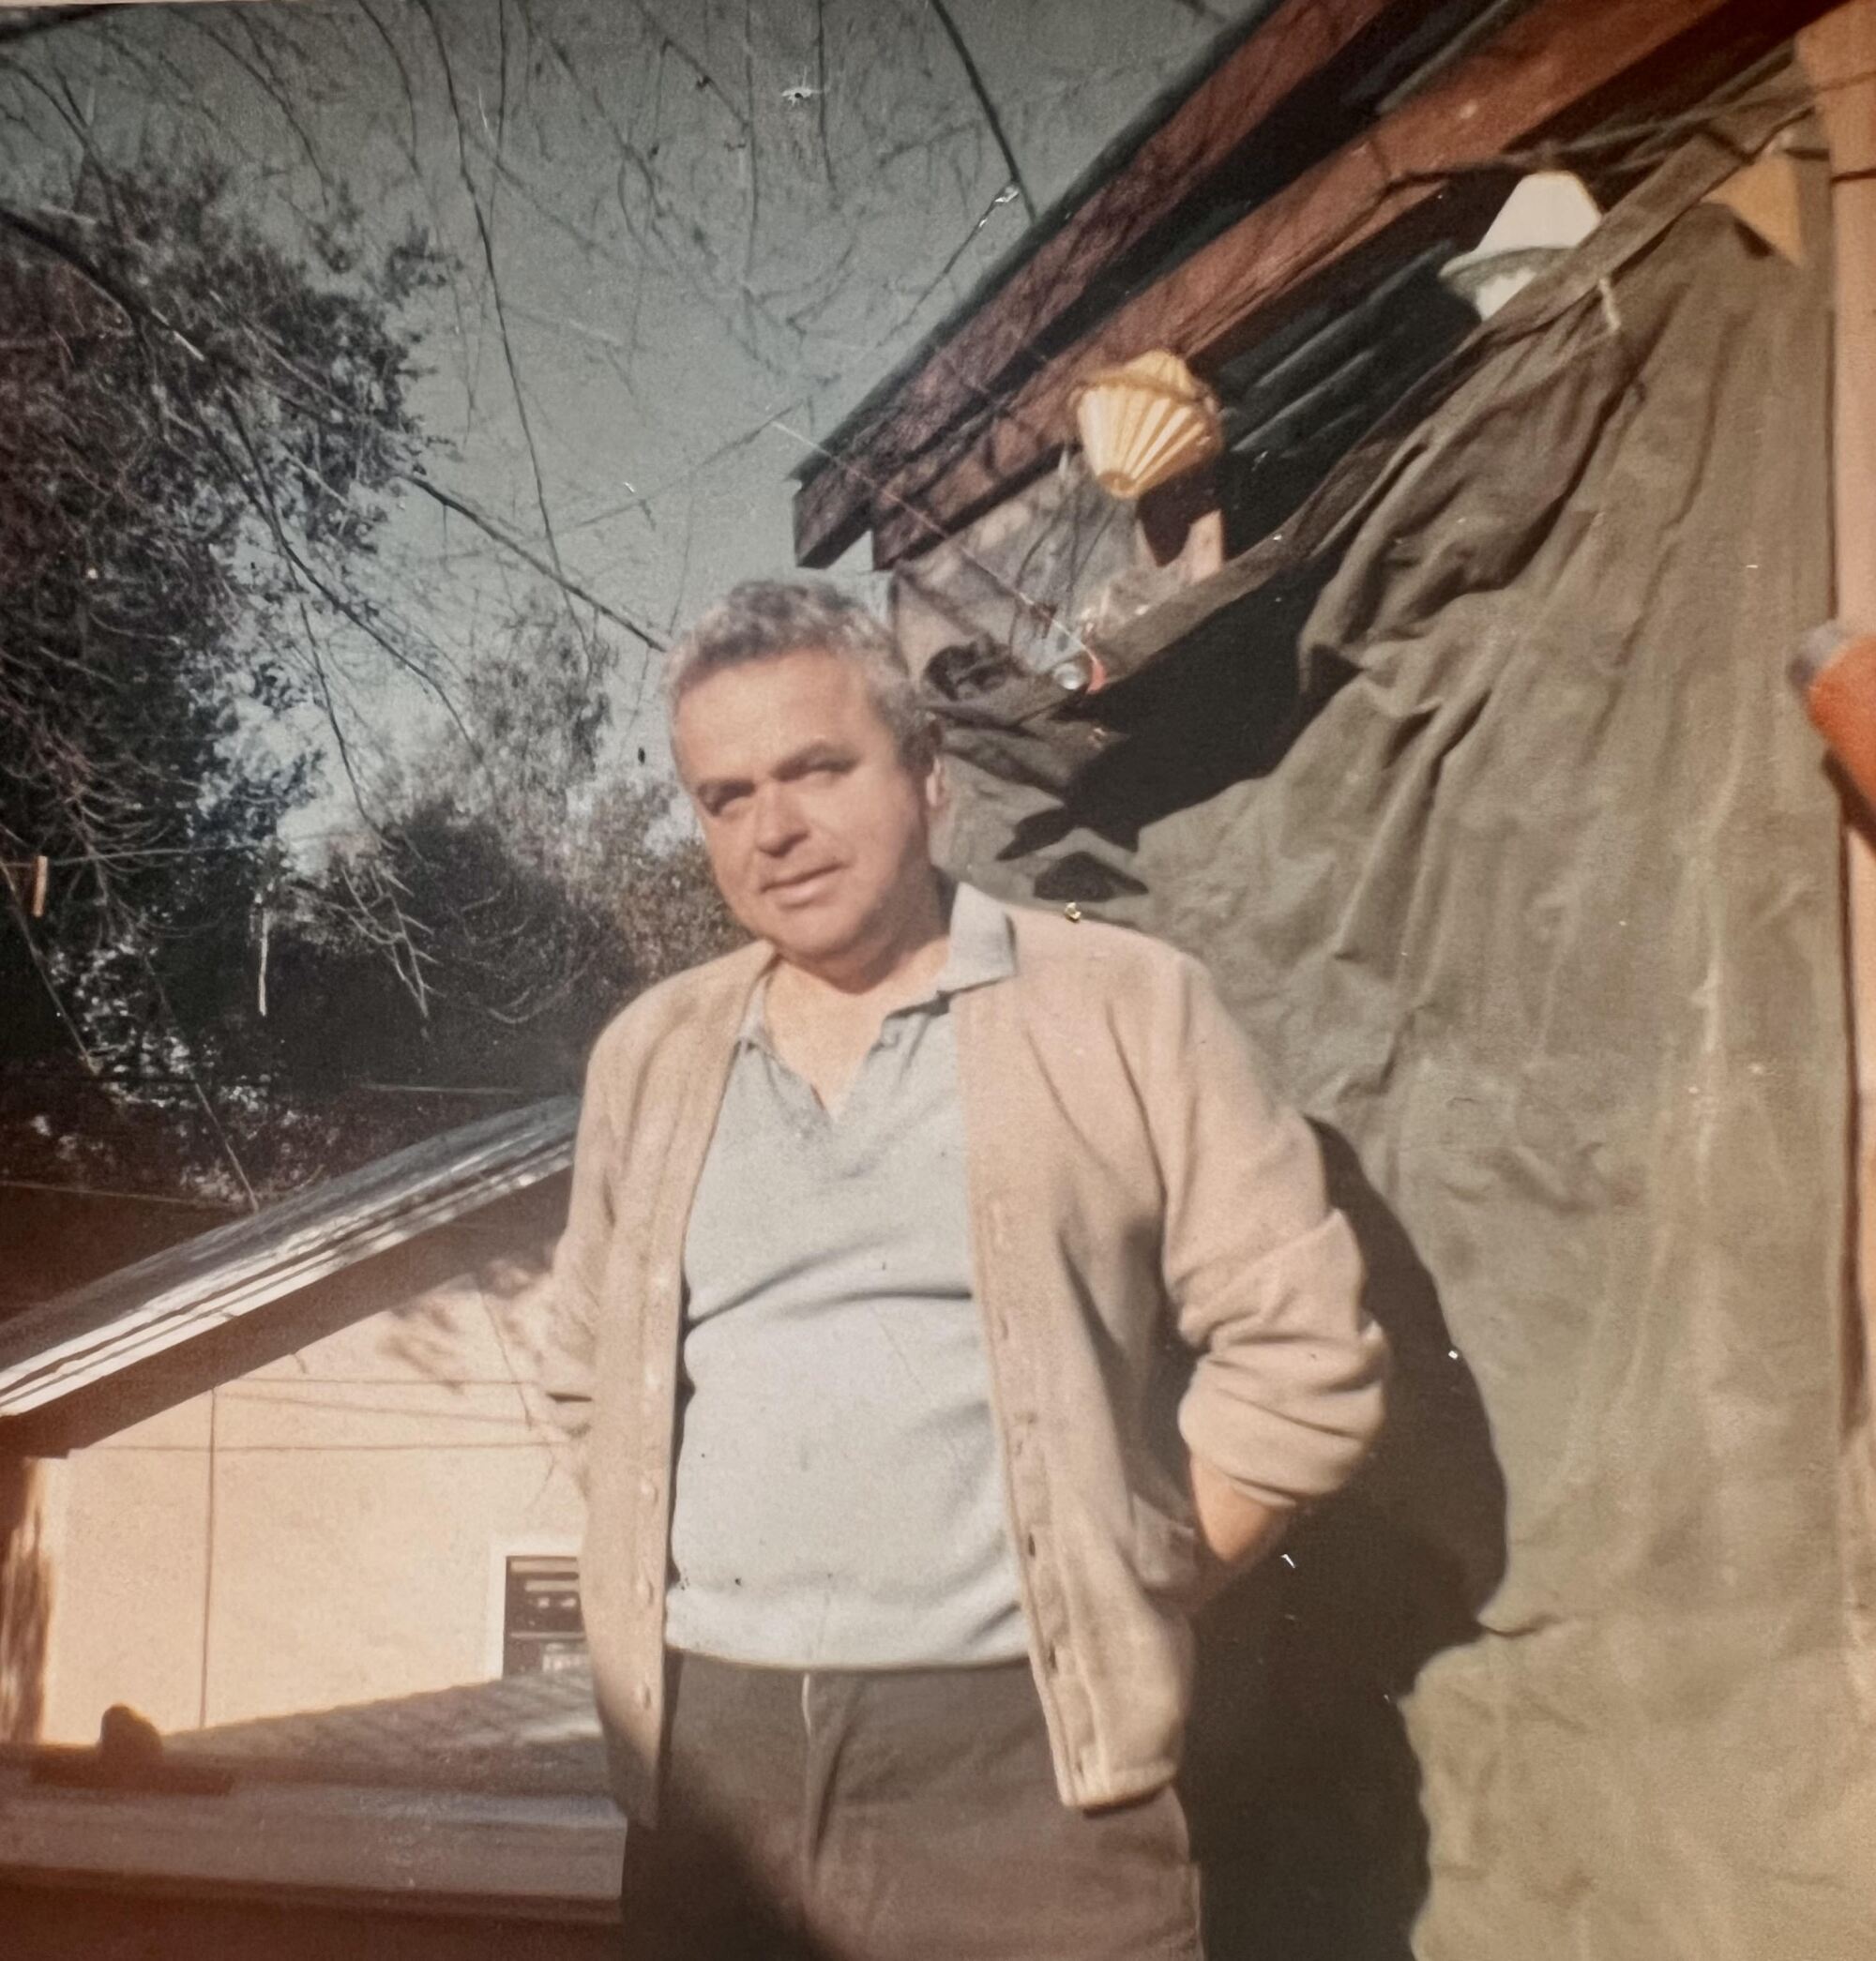 An old photo of Richard Bartindale wearing a blue shirt and a tan sweater, taken outdoors.